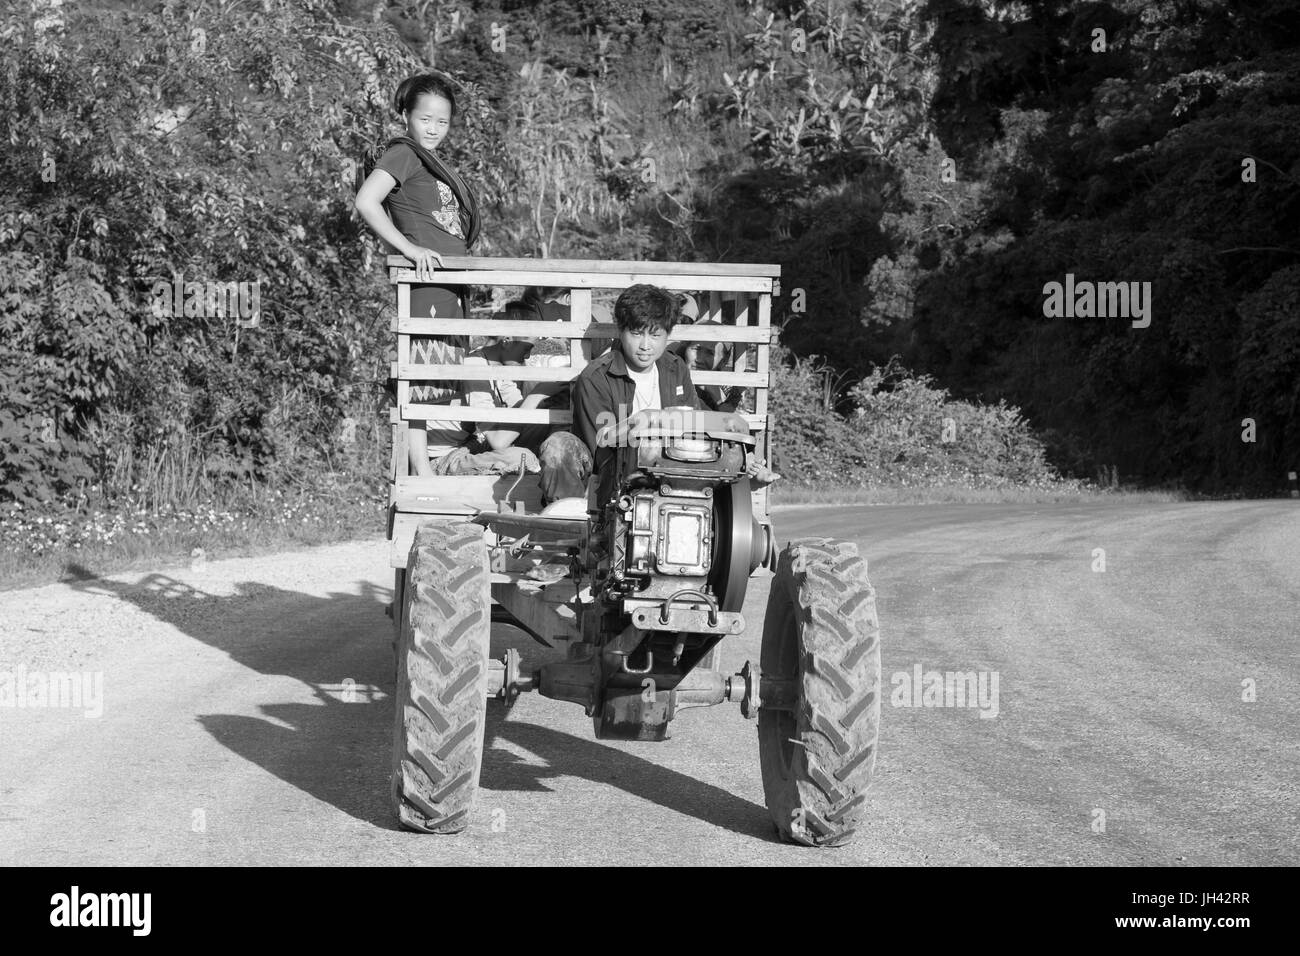 Tak-tak or 'Iron Buffalo', a two-wheeled tractor often modified for a wide variety of purposes in farming and transport in Laos other parts of SE Asia Stock Photo